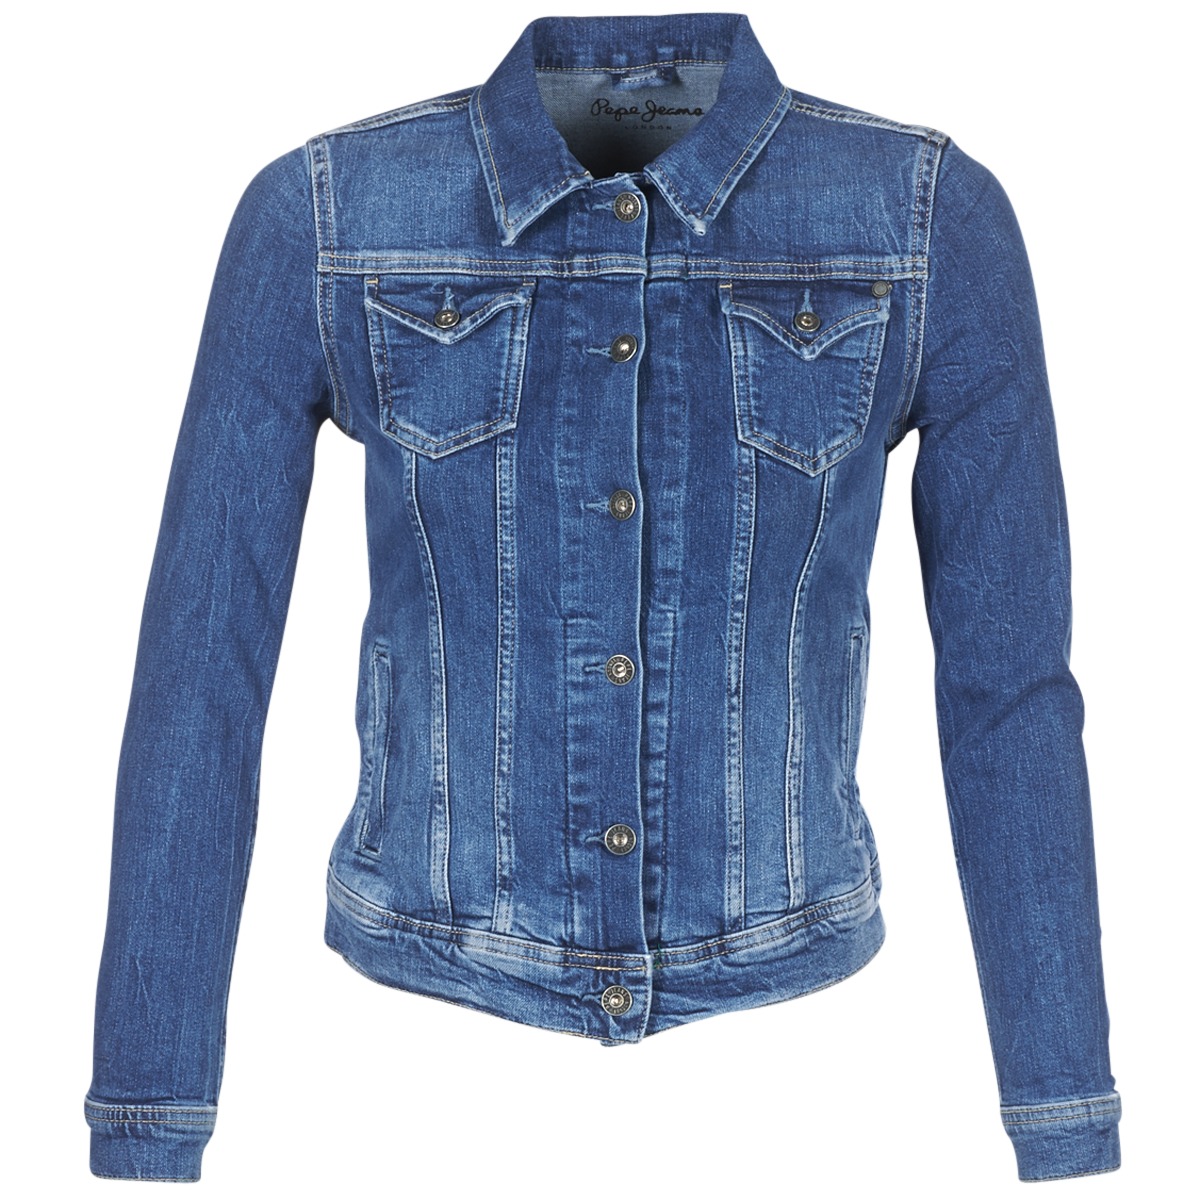 Pepe jeans THRIFT Blue / Denim Fast ! Europe 87,20 - Women | Clothing delivery € jackets Spartoo - Medium